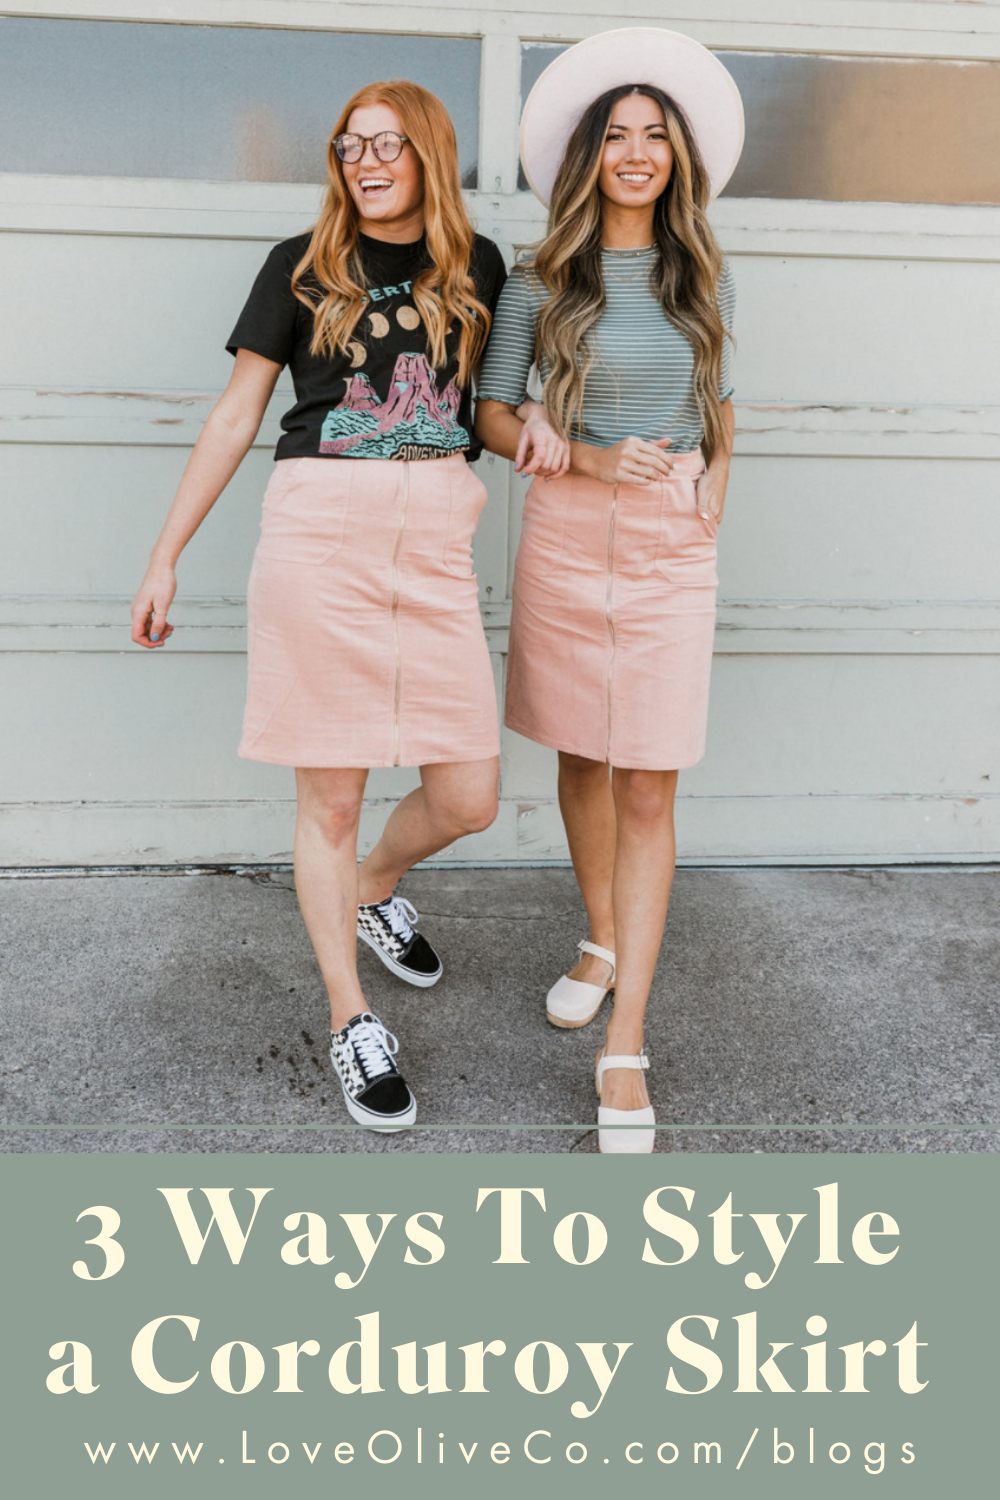 3 Ways to Style a Corduroy Skirt www.loveoliveco.com